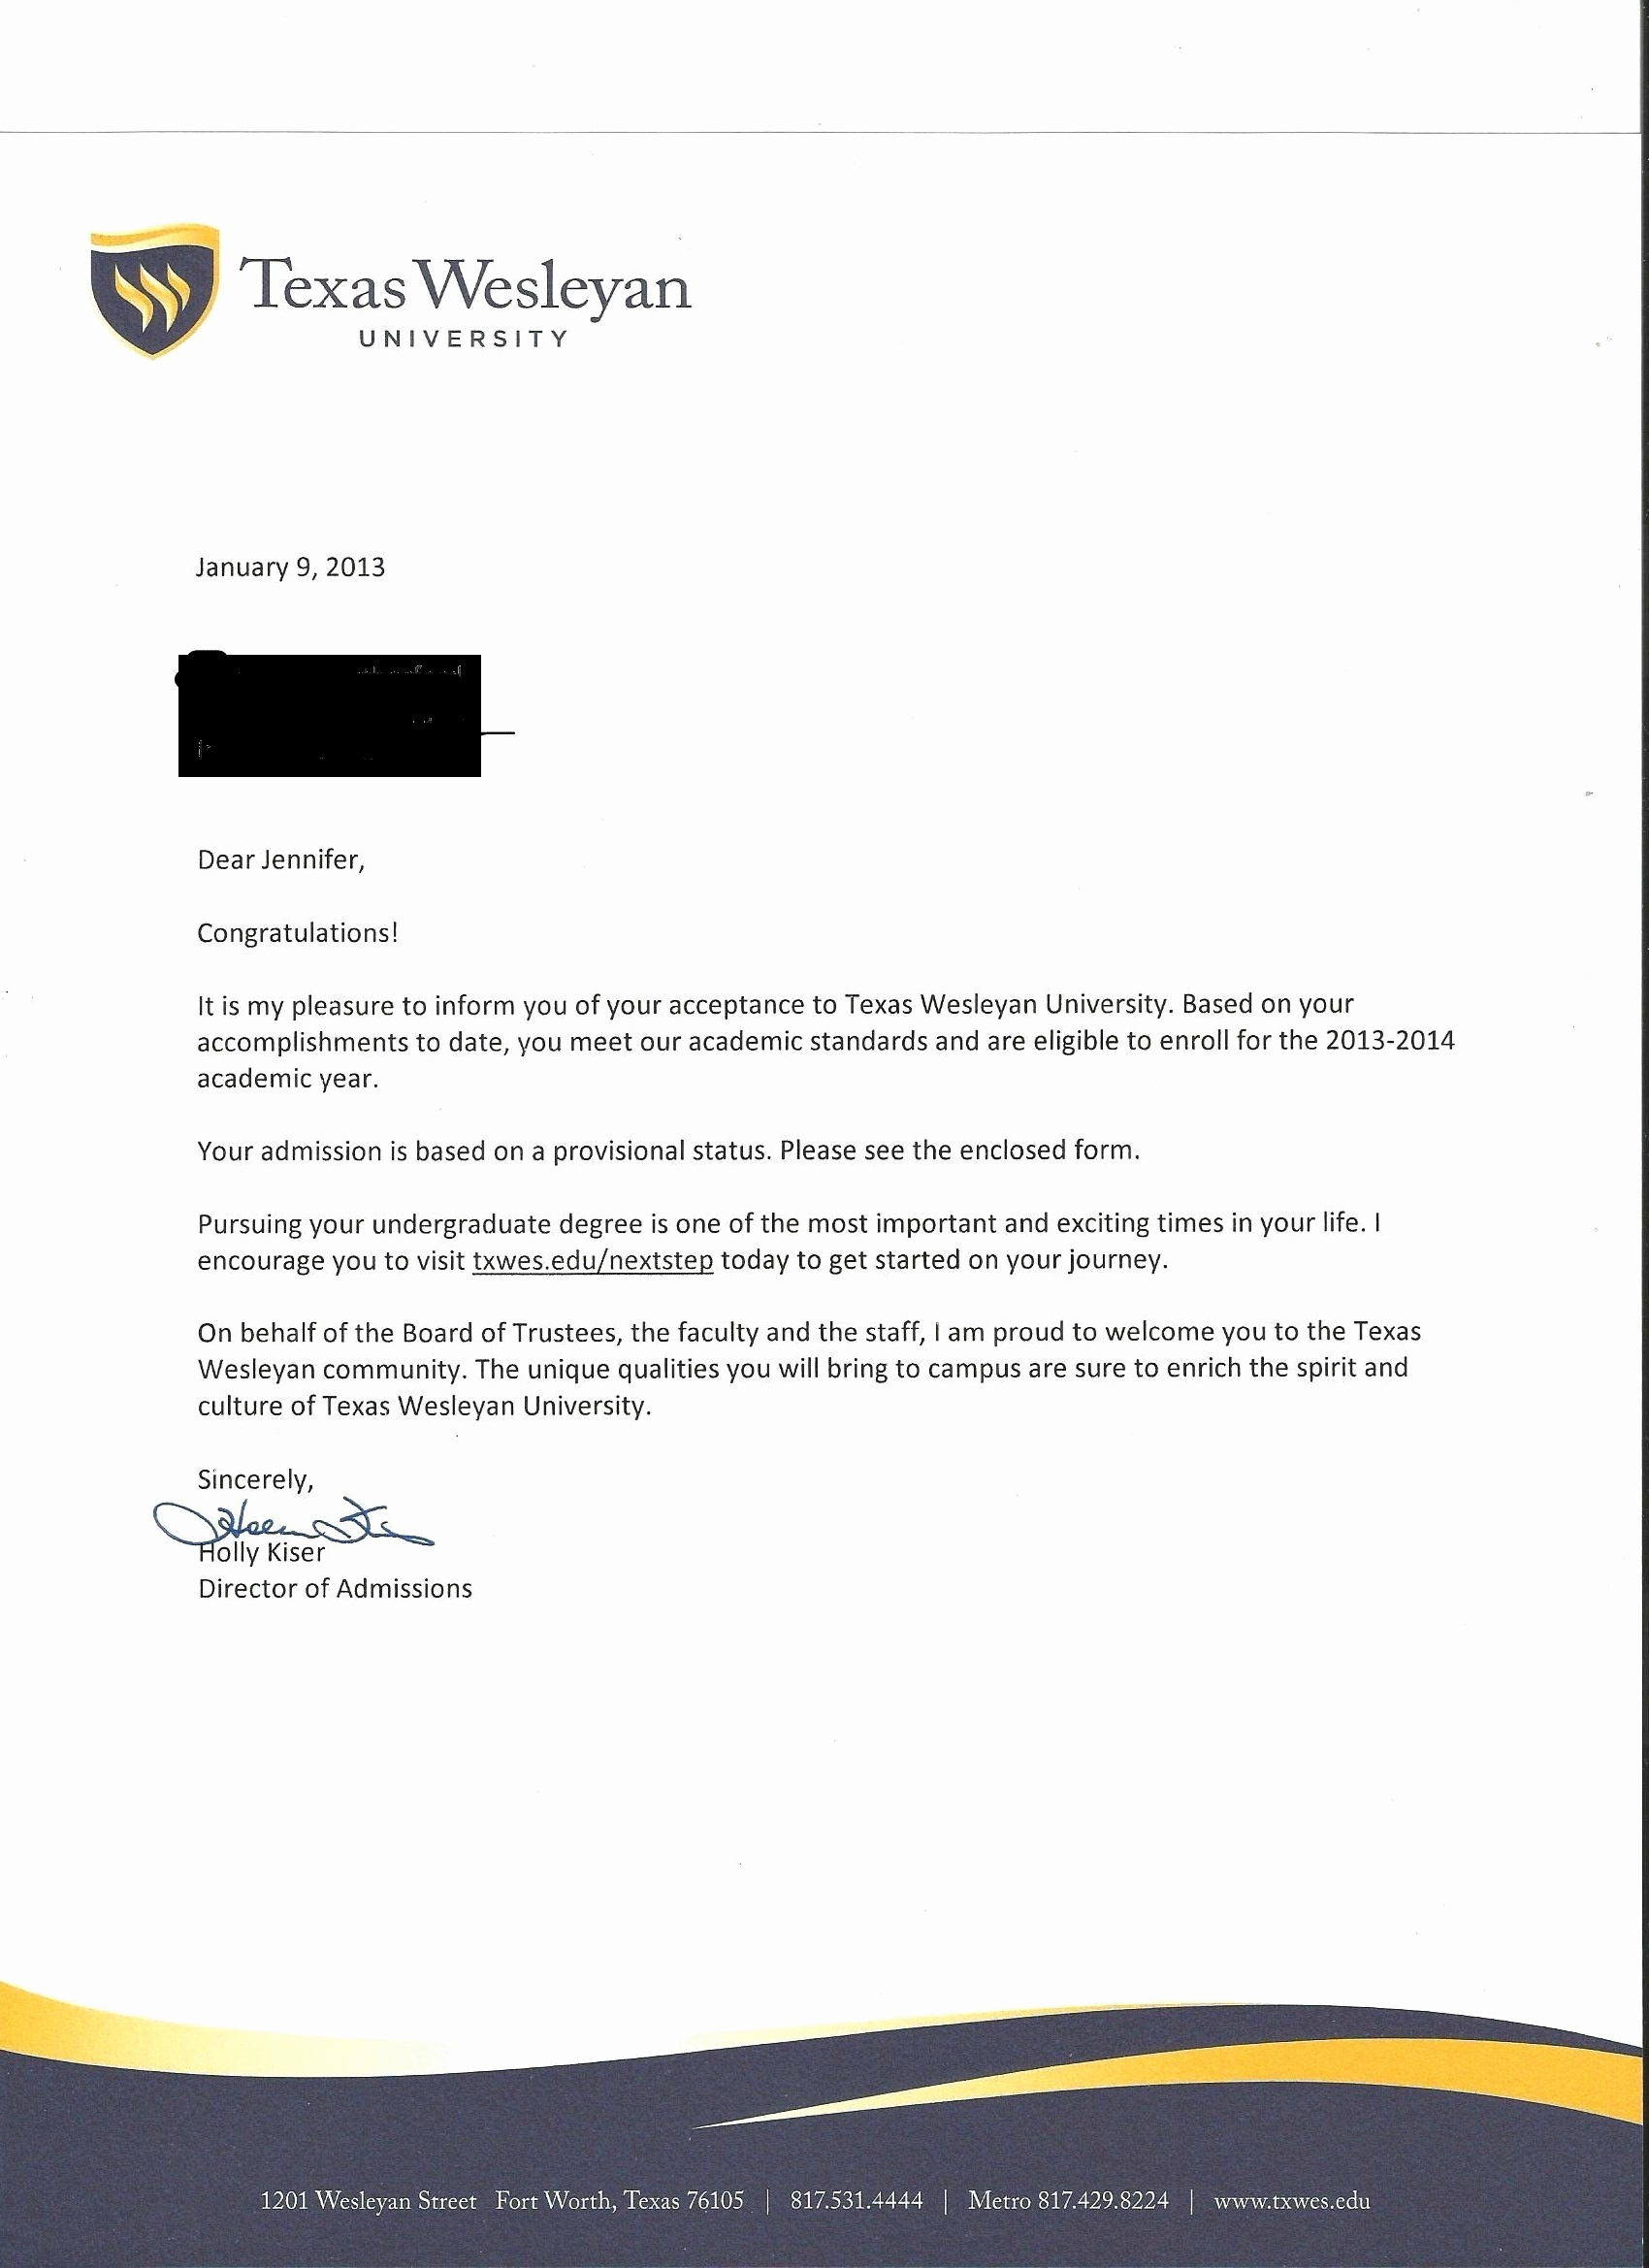 College Acceptance Letter Sample Fresh My College Acceptance Letter Imgur